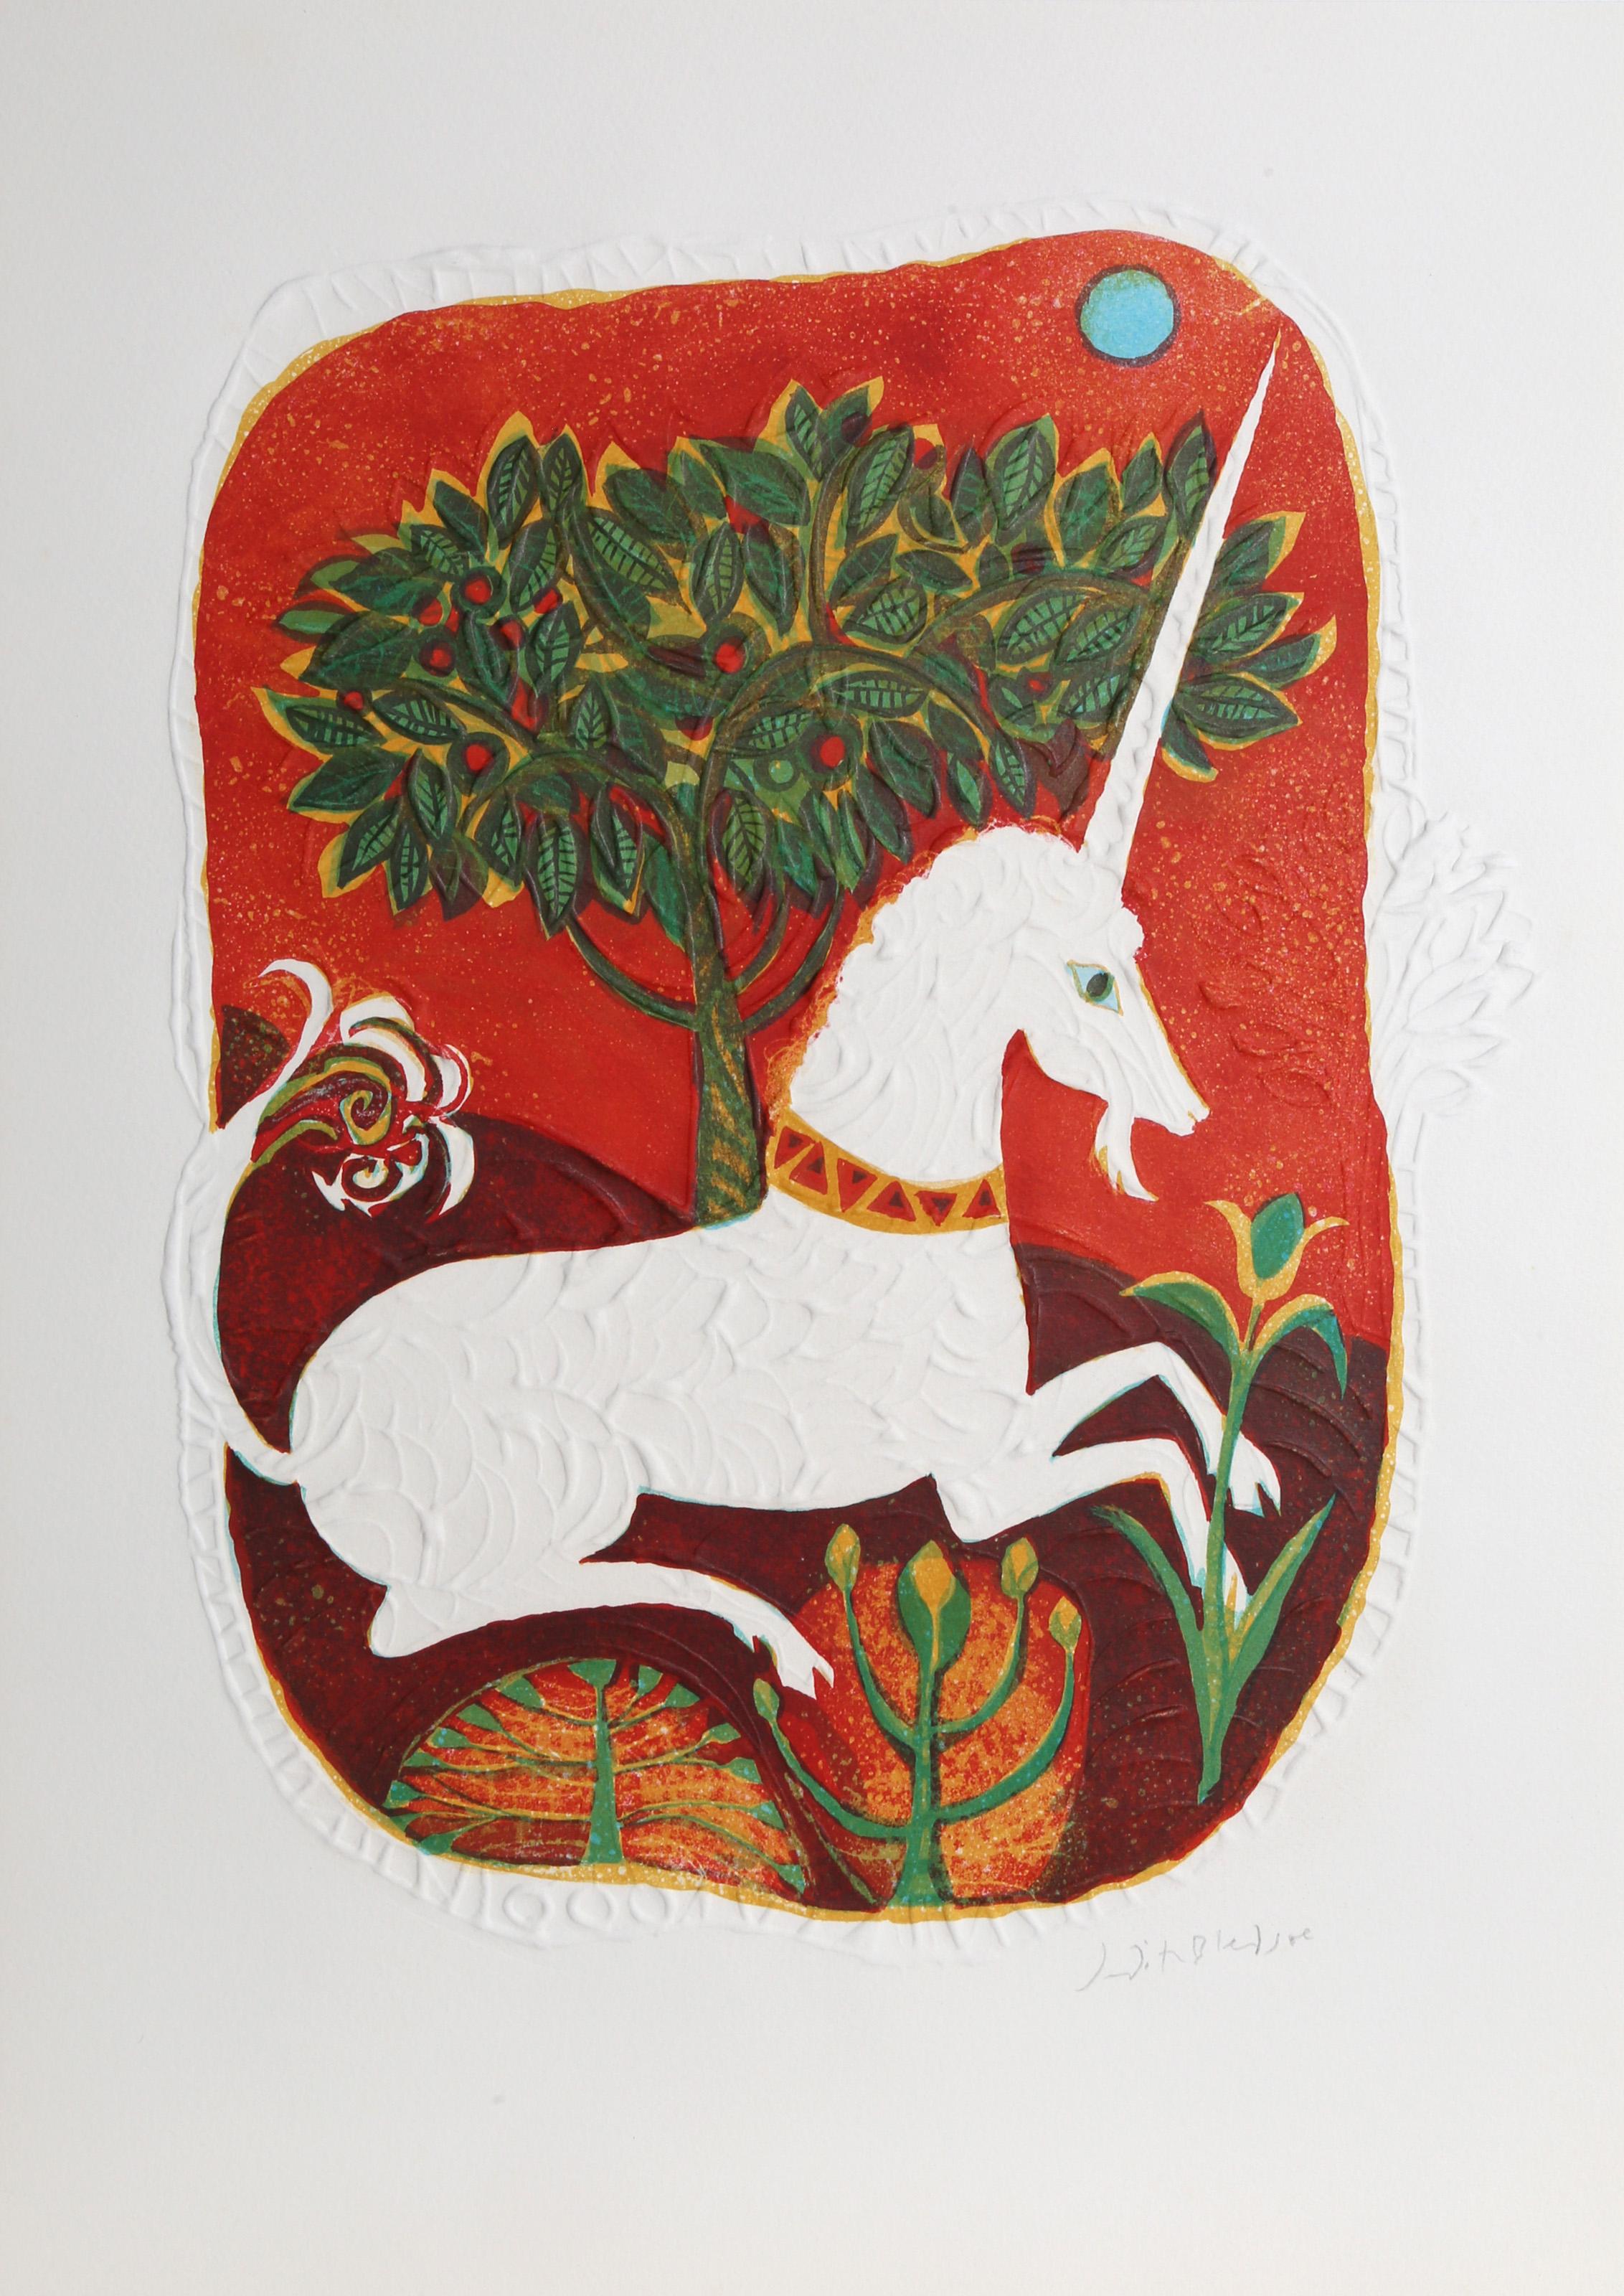 Judith Bledsoe, American (1938 - 2013) -  Unicorn Tapestry. Year: circa 1970, Medium: Lithograph with Embossing, signed in pencil, Edition: EA, Size: 21 x 14.5 in. (53.34 x 36.83 cm), Description: Judith Bledsoe's sweet rendering of an all-white